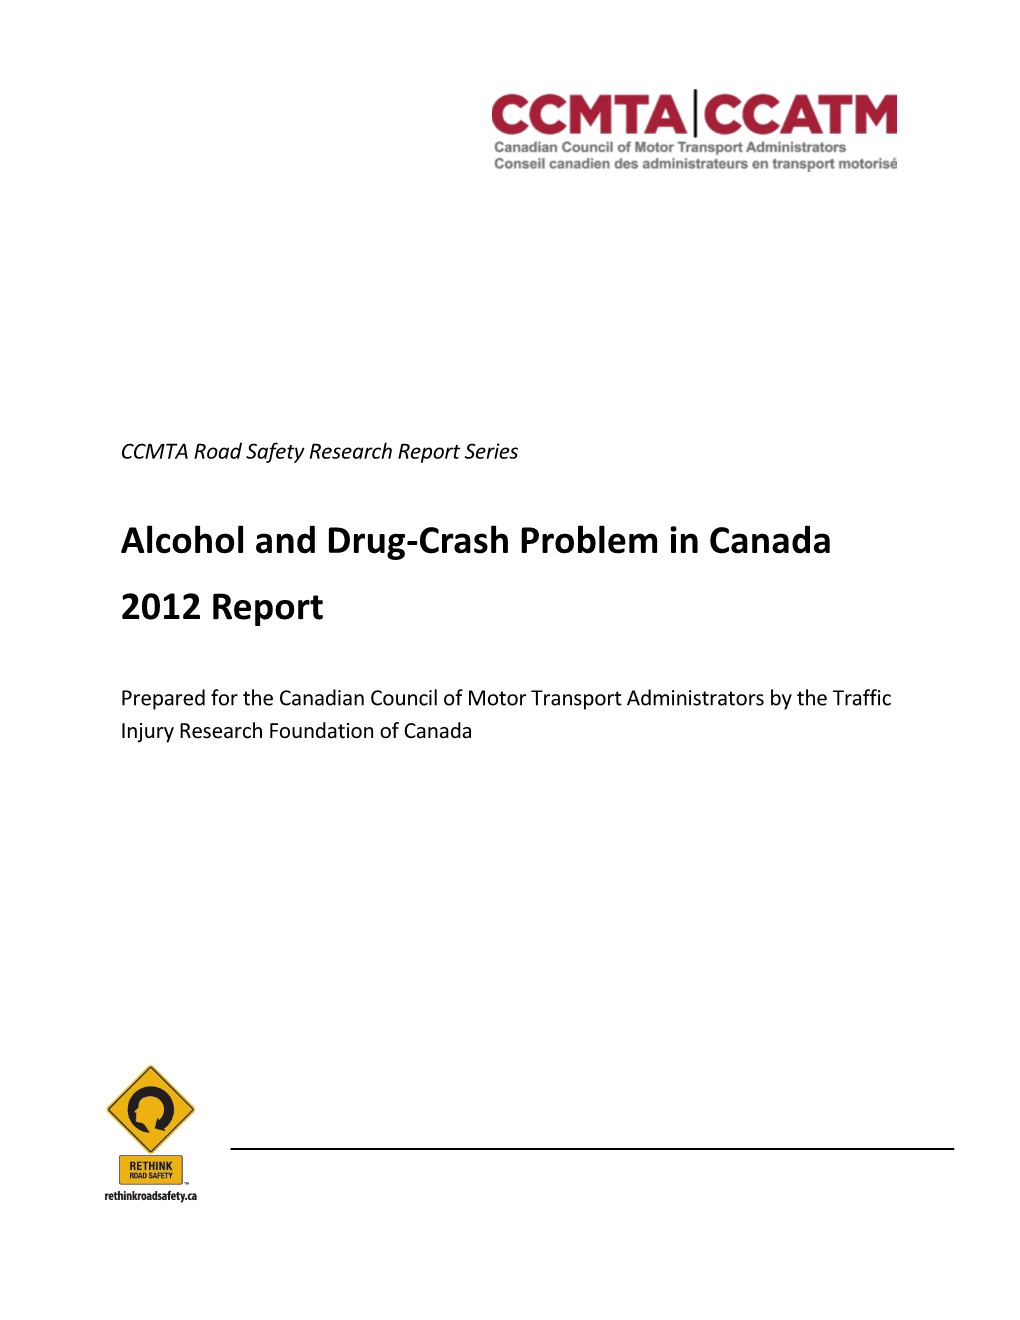 The Alcohol-Crash Problem in Canada, Was Co-Funded by Transport Canada and the Canadian Council of Motor Transport Administrators (CCMTA)